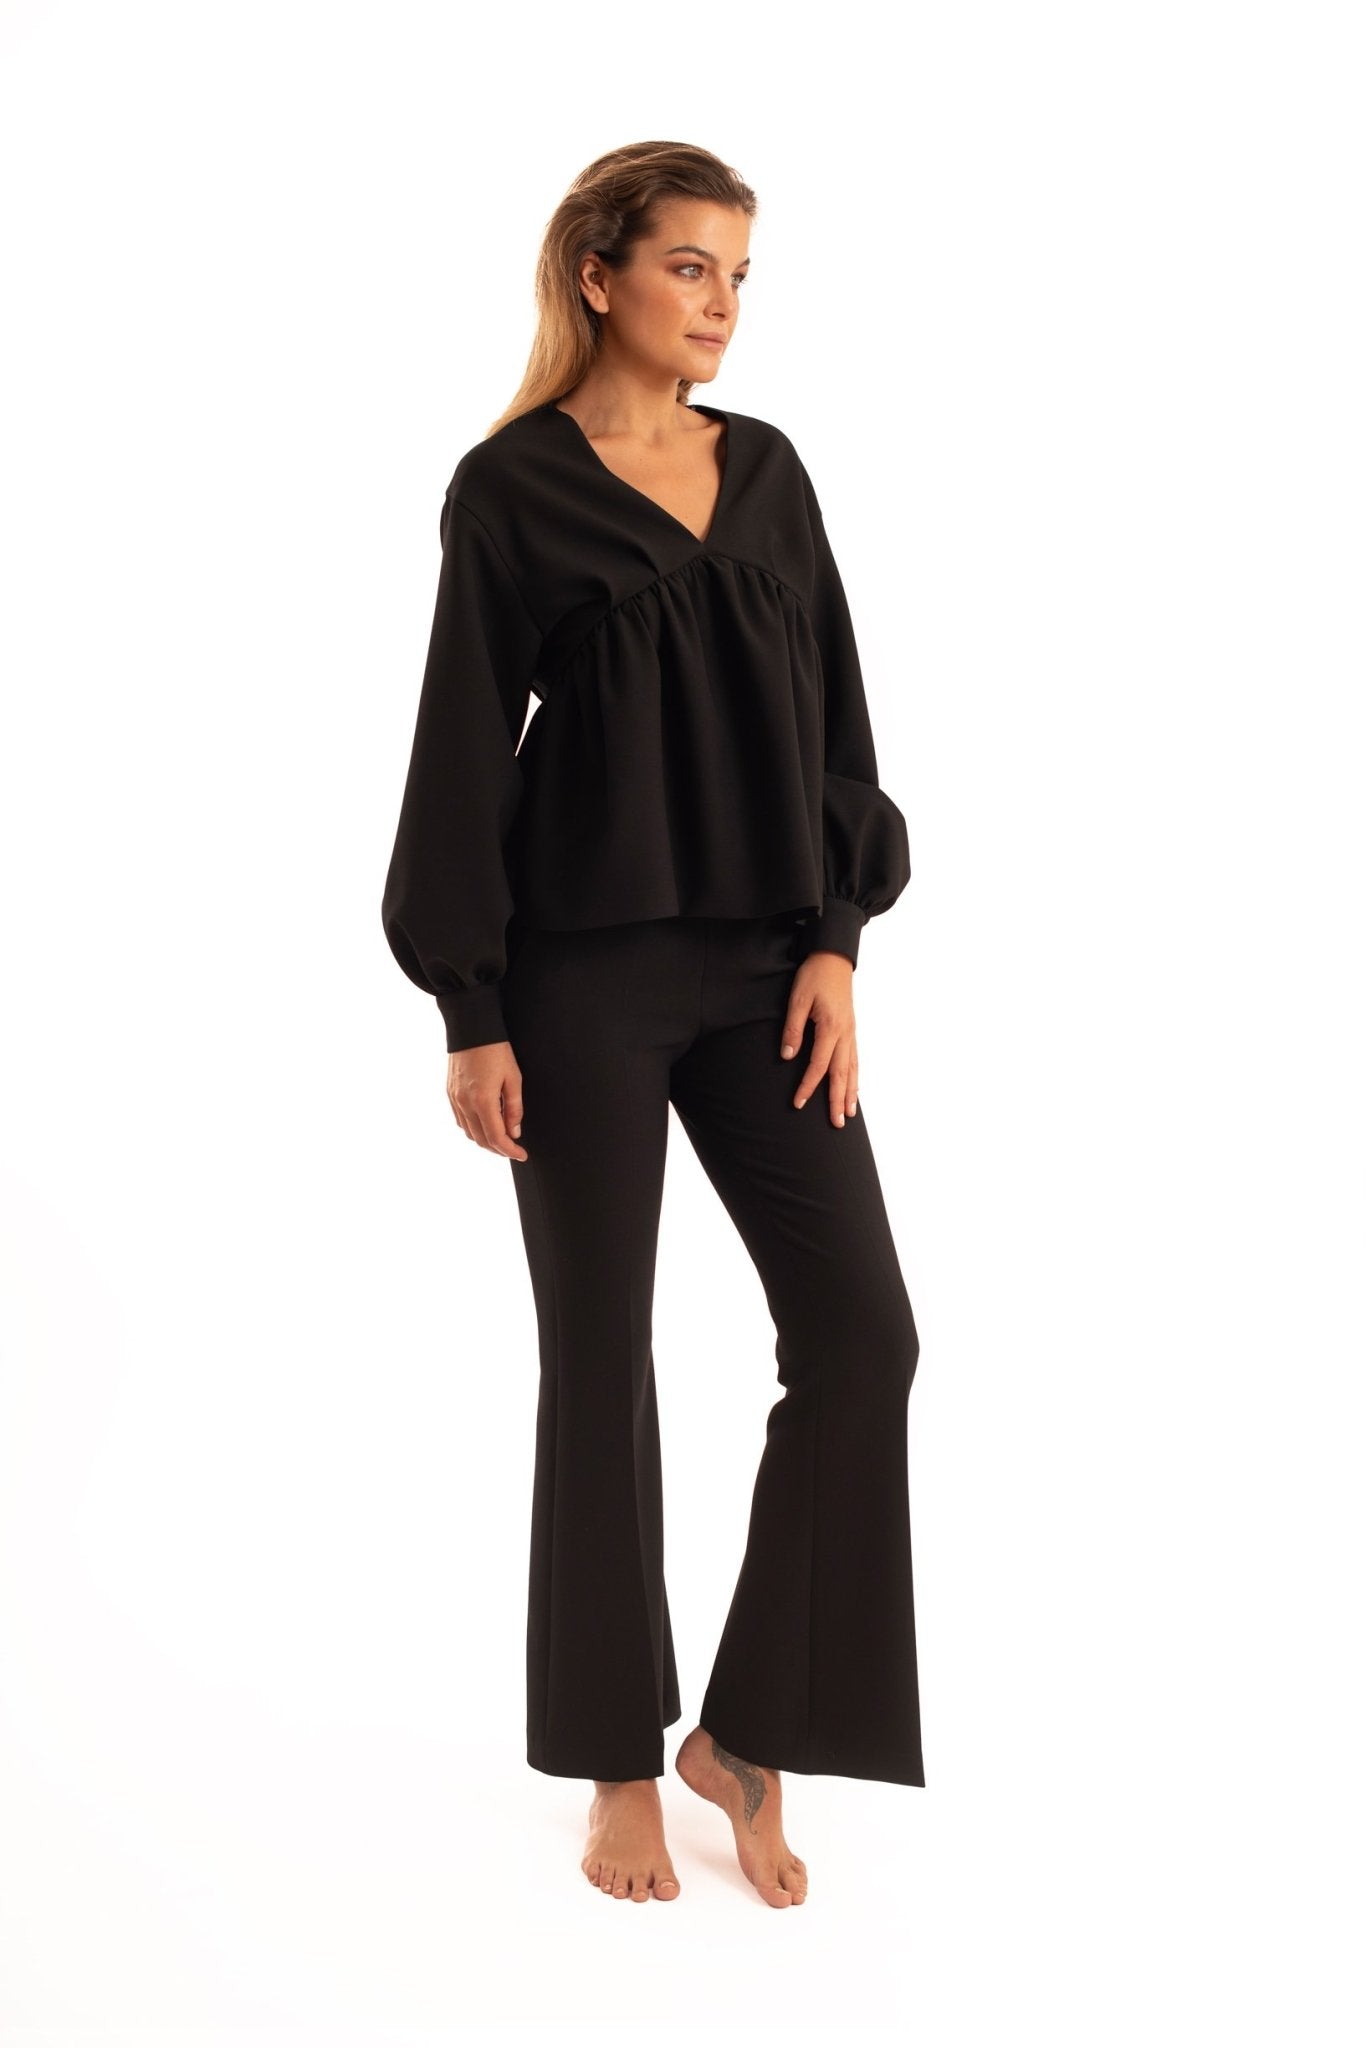 Black Balone Blouse - The Clothing LoungeNOPIN